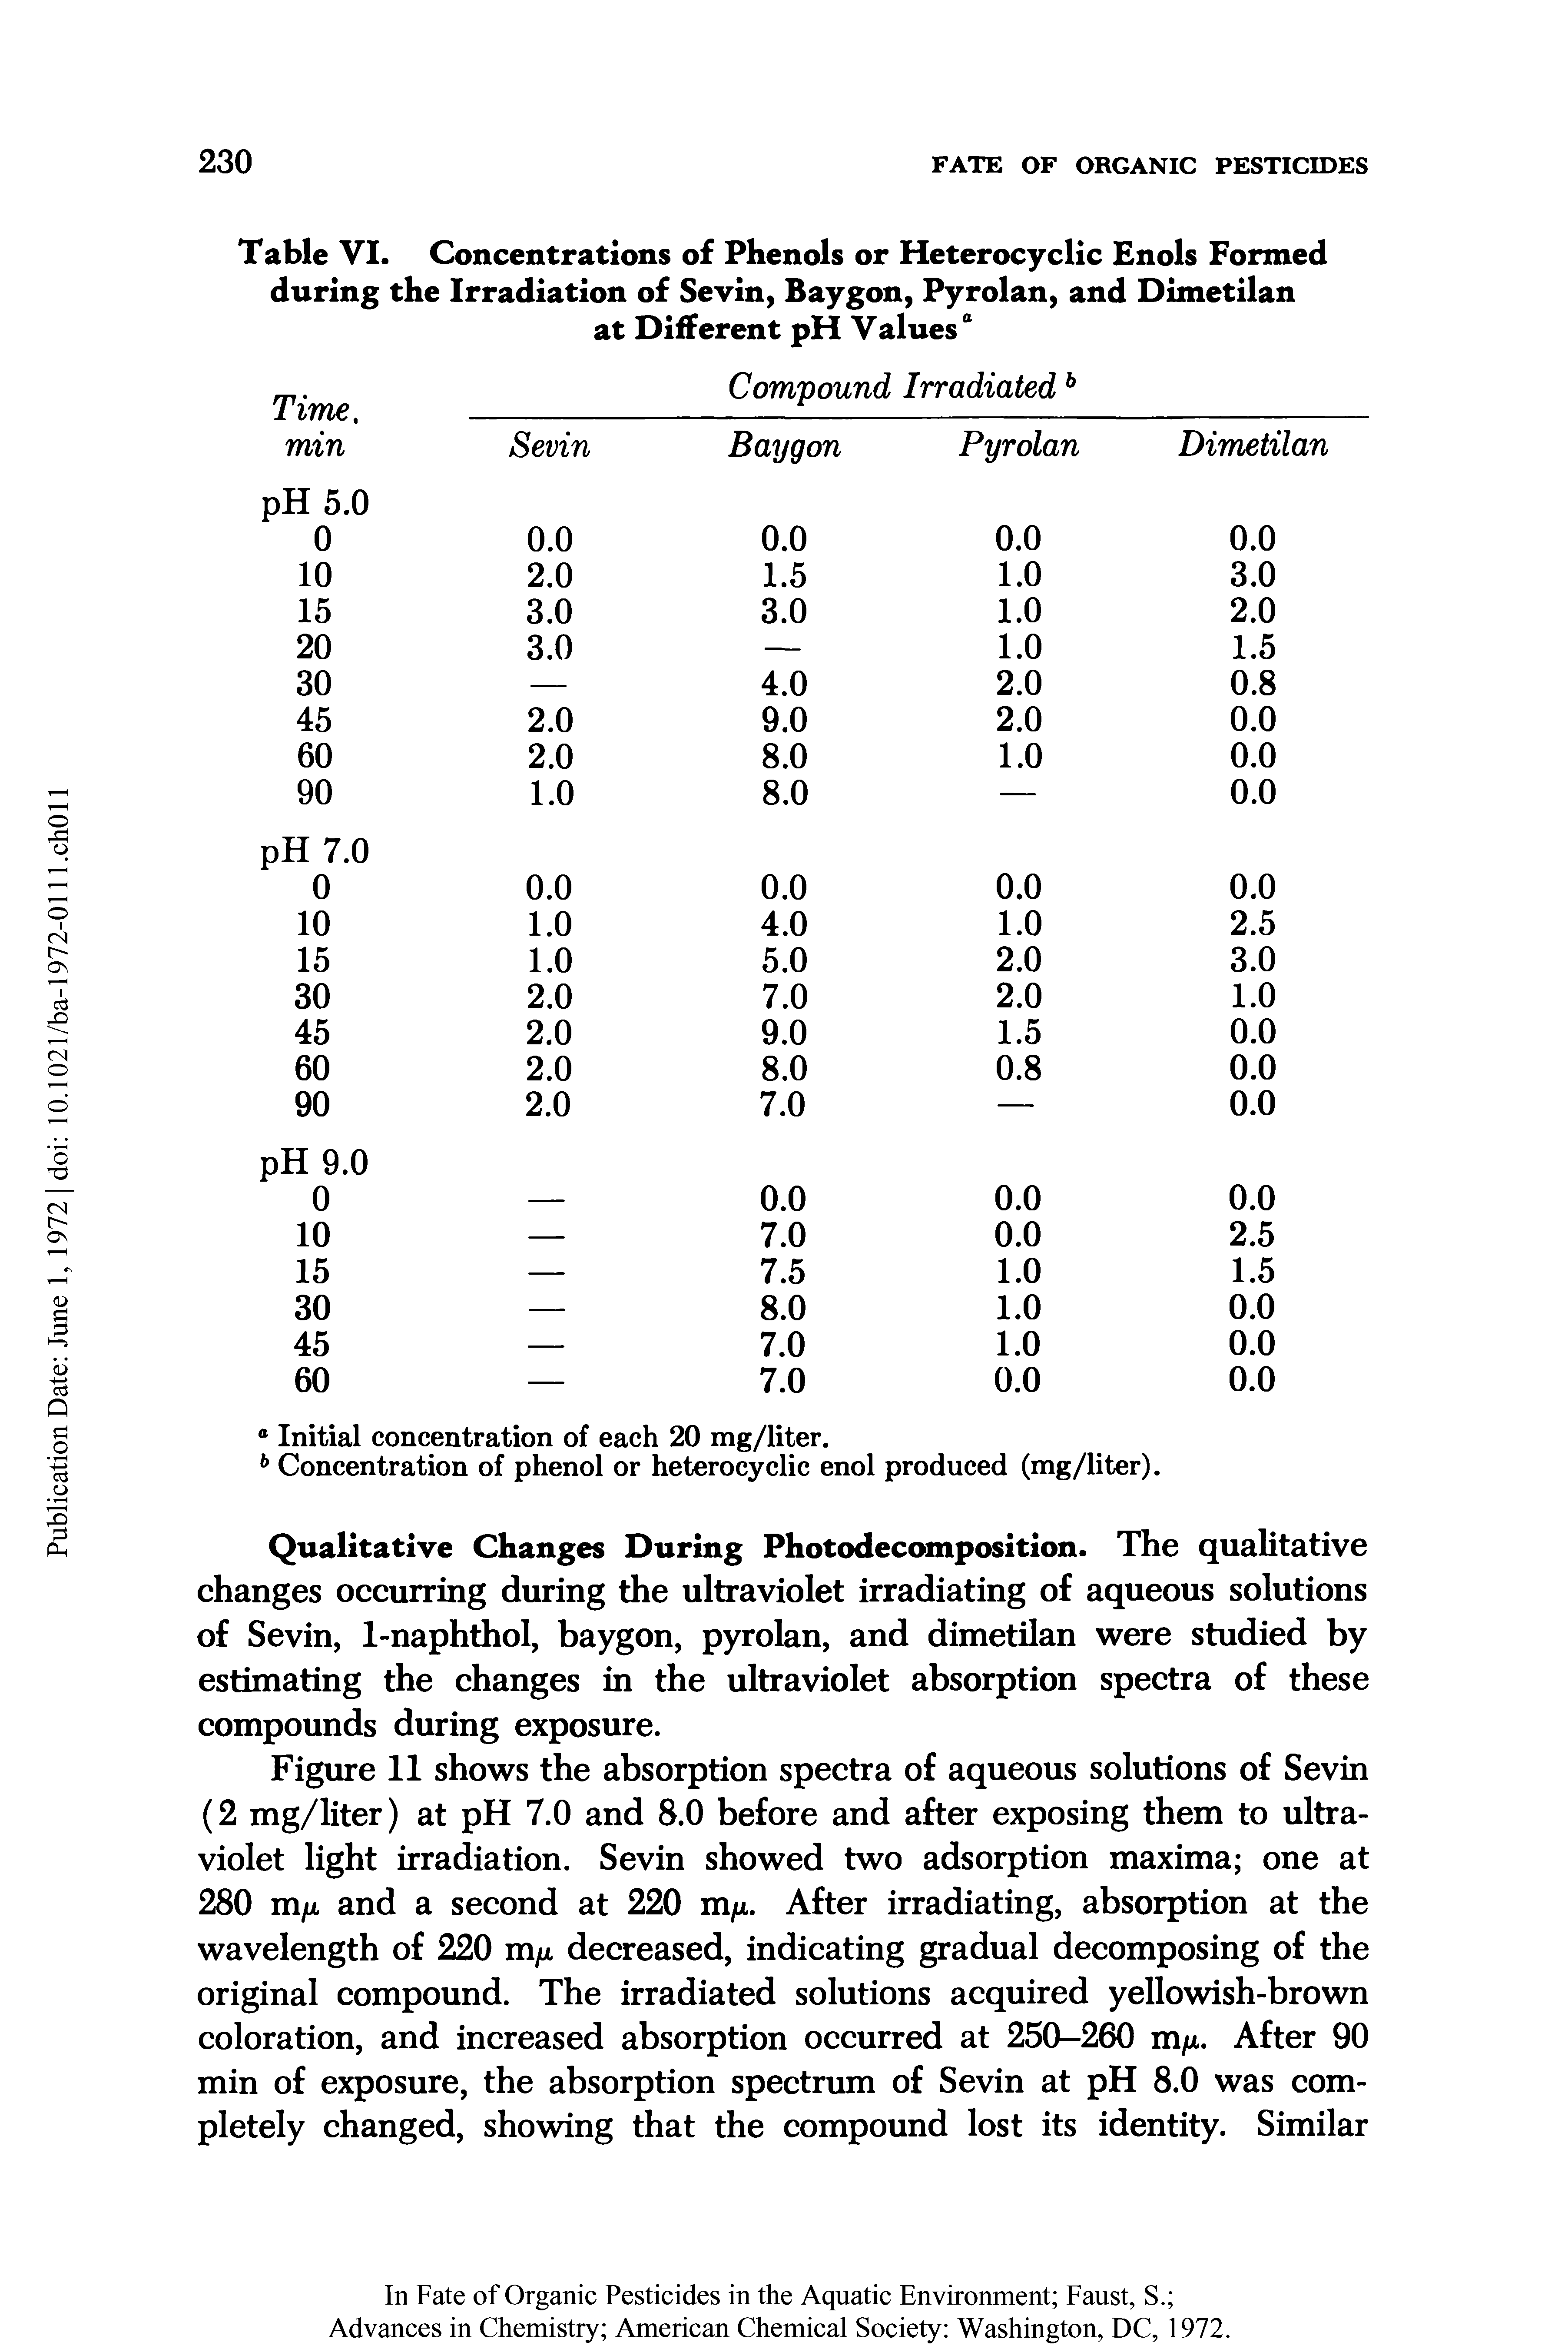 Table VI. Concentrations of Phenols or Heterocyclic Enols Formed during the Irradiation of Sevin, Baygon, Pyrolan, and Dimetilan at Different pH Values ...